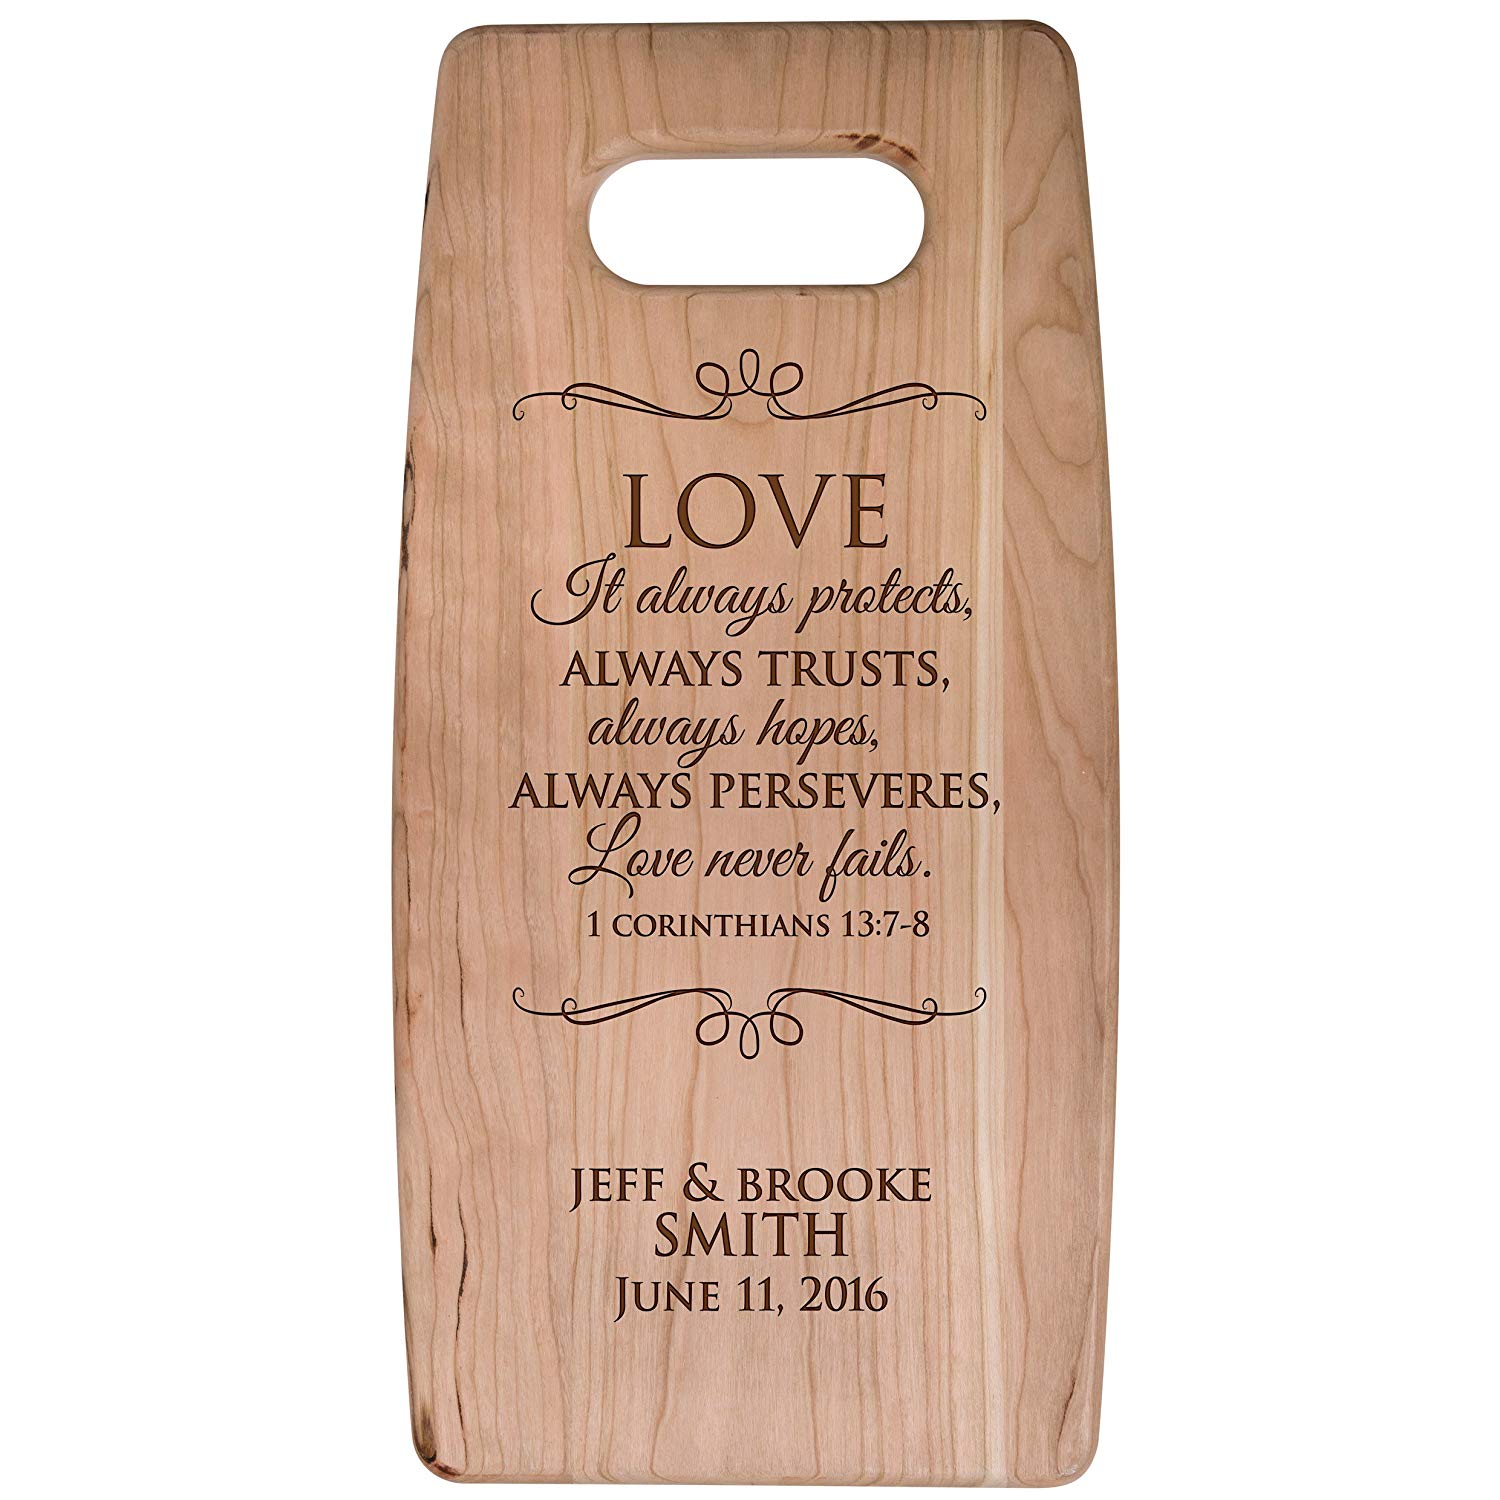 Personalized Engraved Cherry Cutting Board - Love Always Protects - LifeSong Milestones